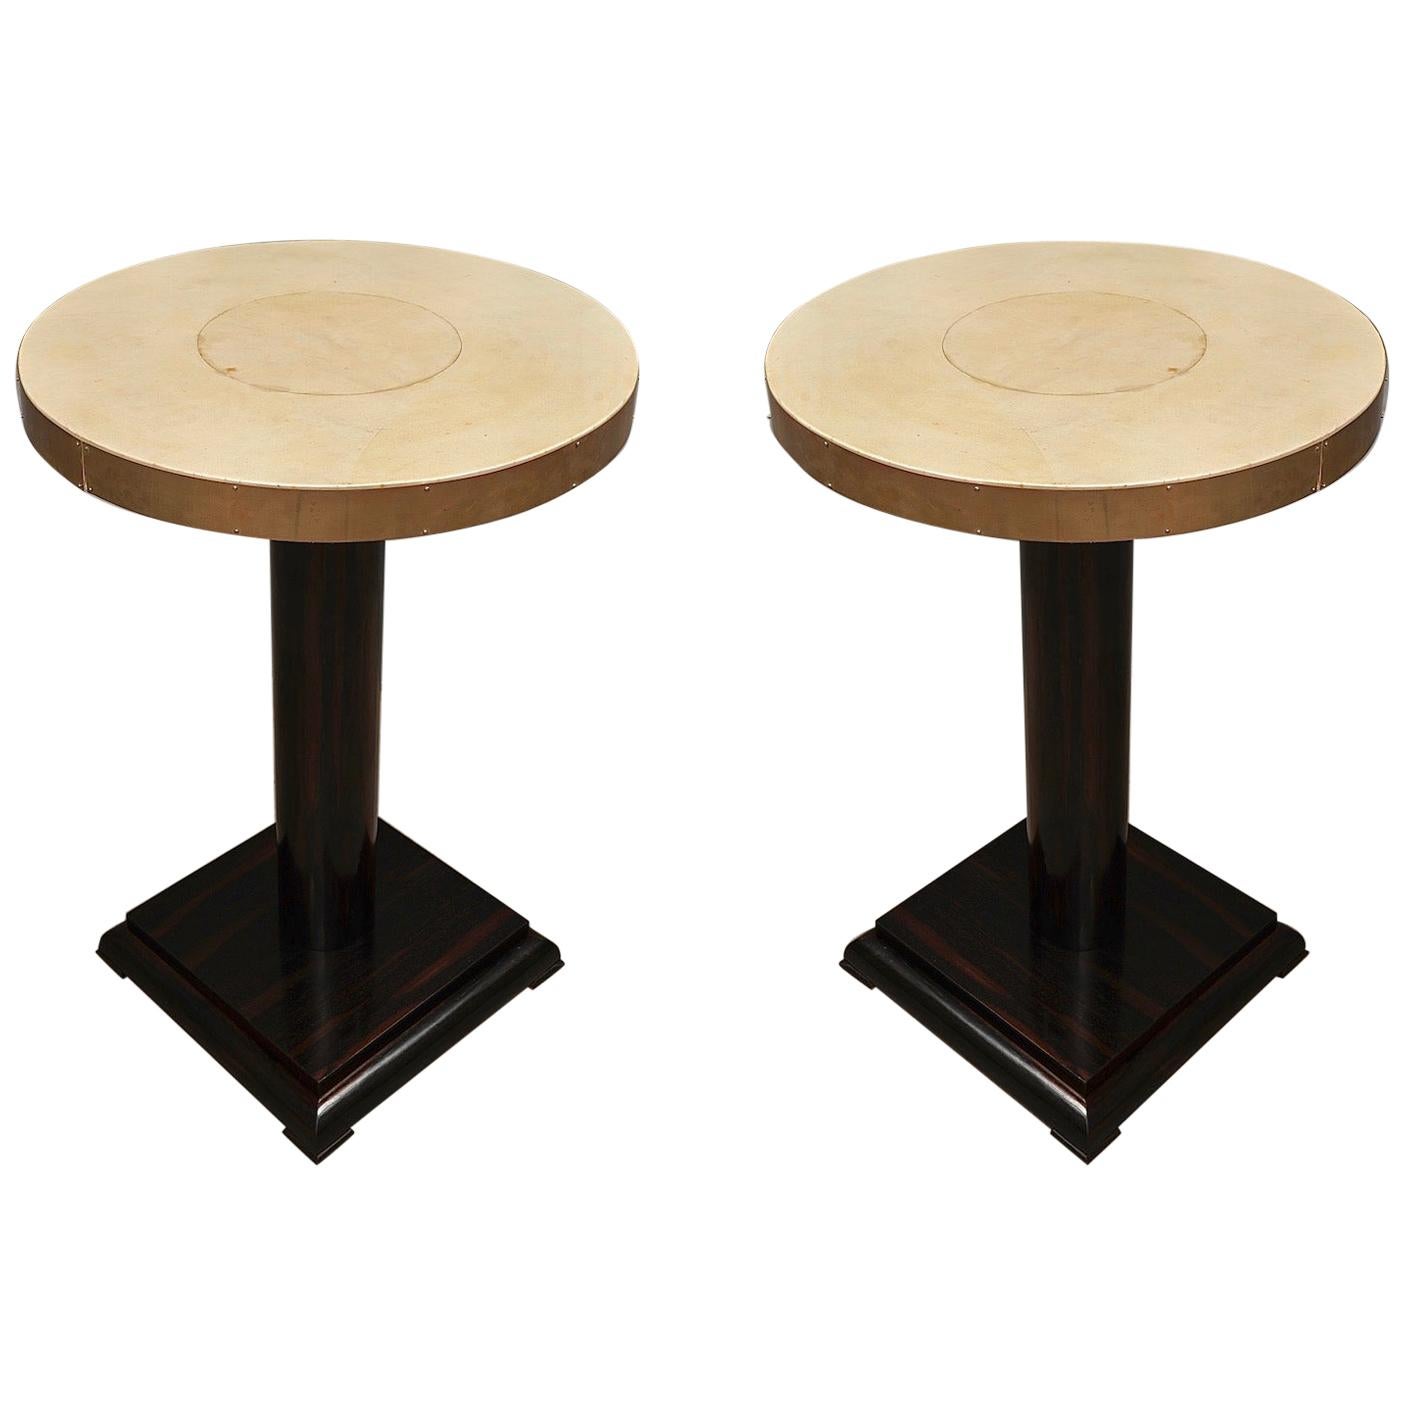 Pair of Art Deco Macassar Goat Skin and Brass Side Tables, 1930